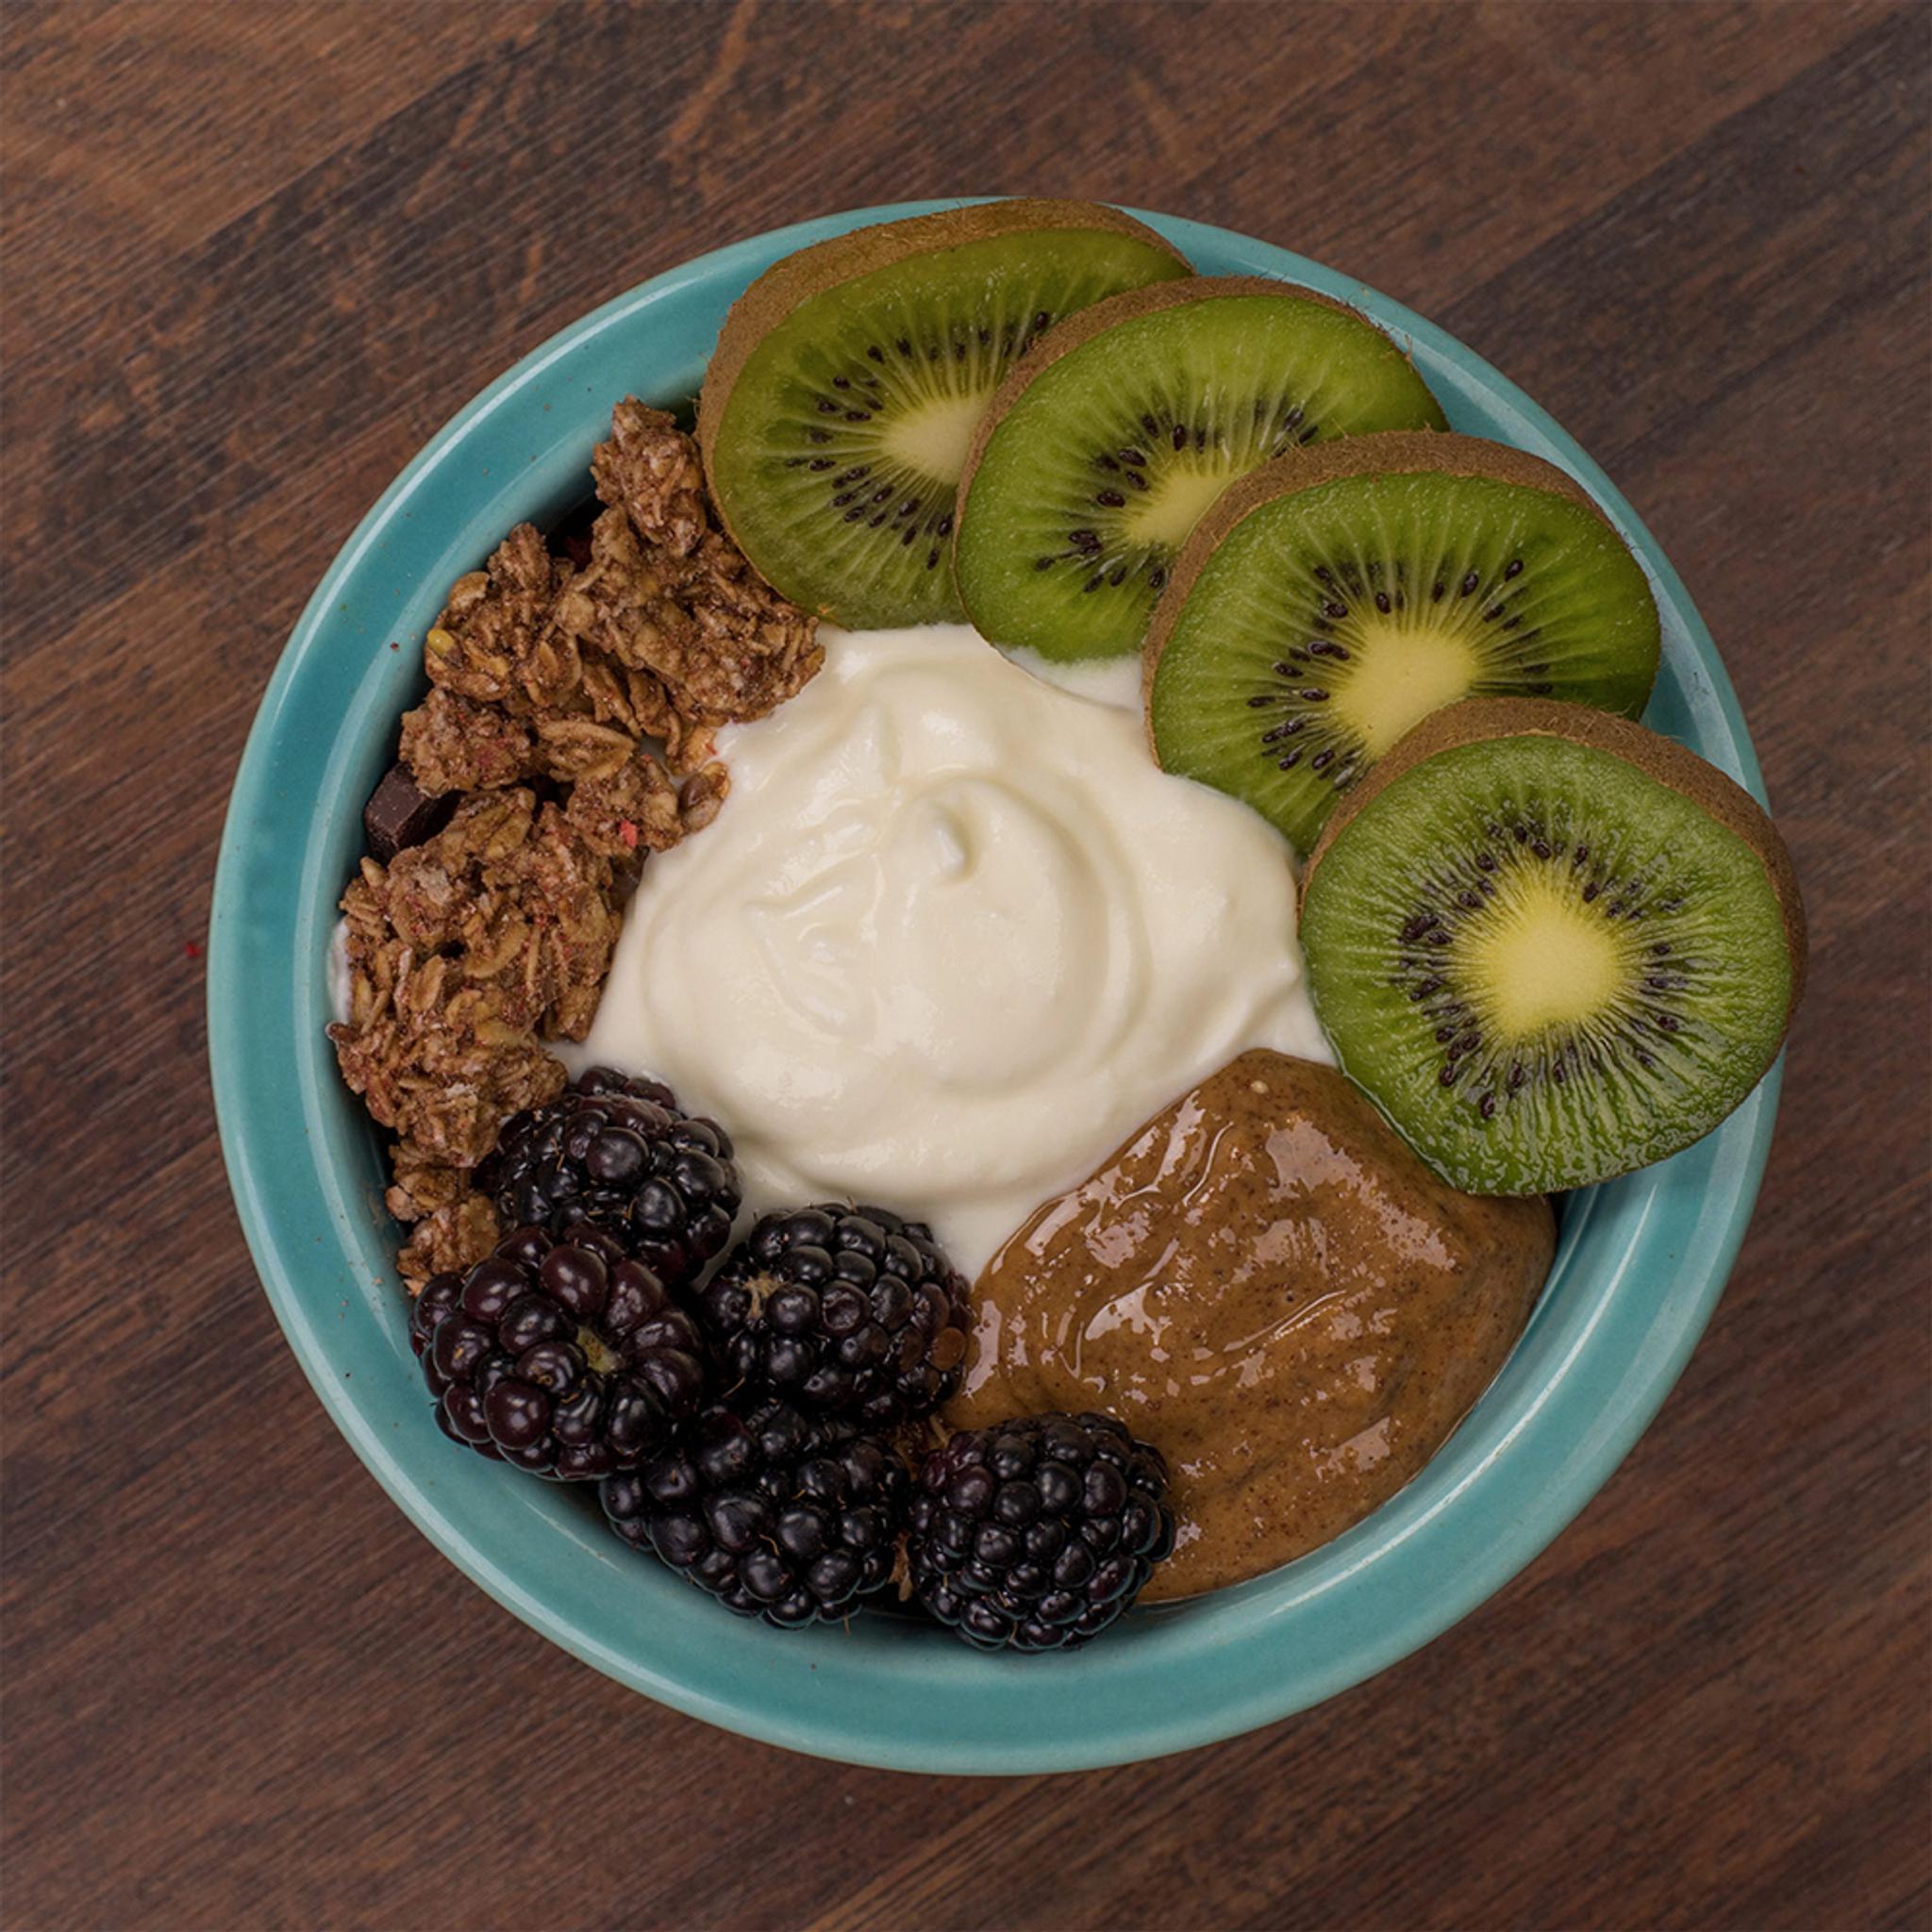 Yogurt bowl with fruit, almond butter and granola.